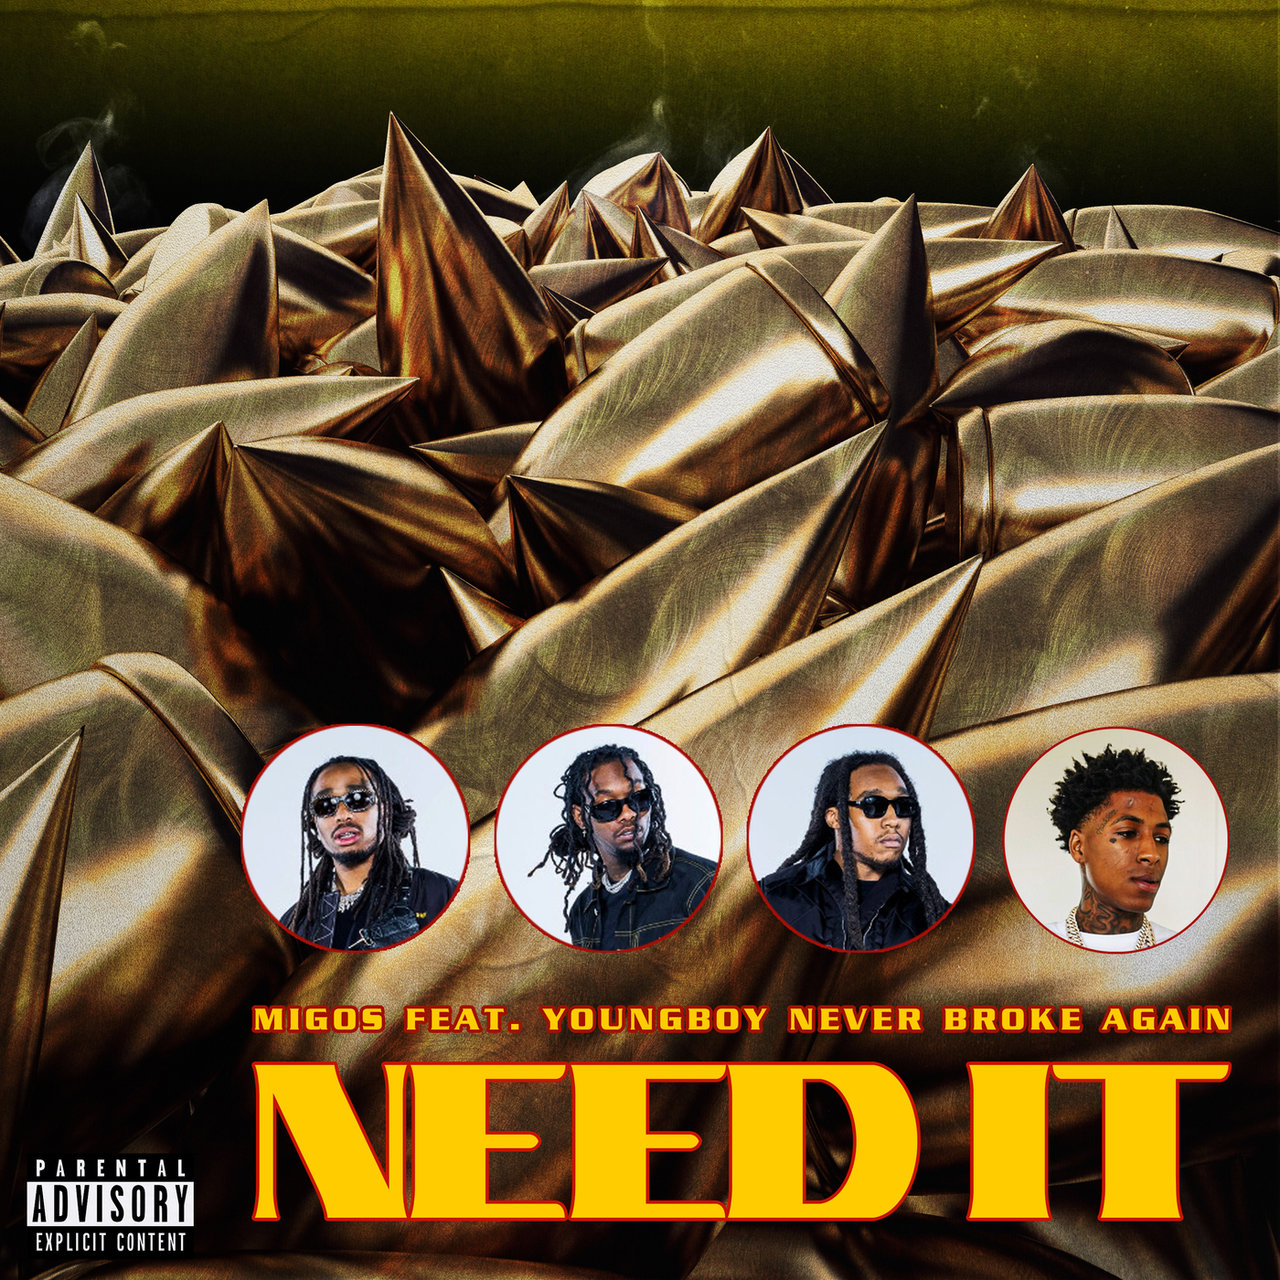 Migos - Need It (ft. YoungBoy Never Broke Again) (Cover)